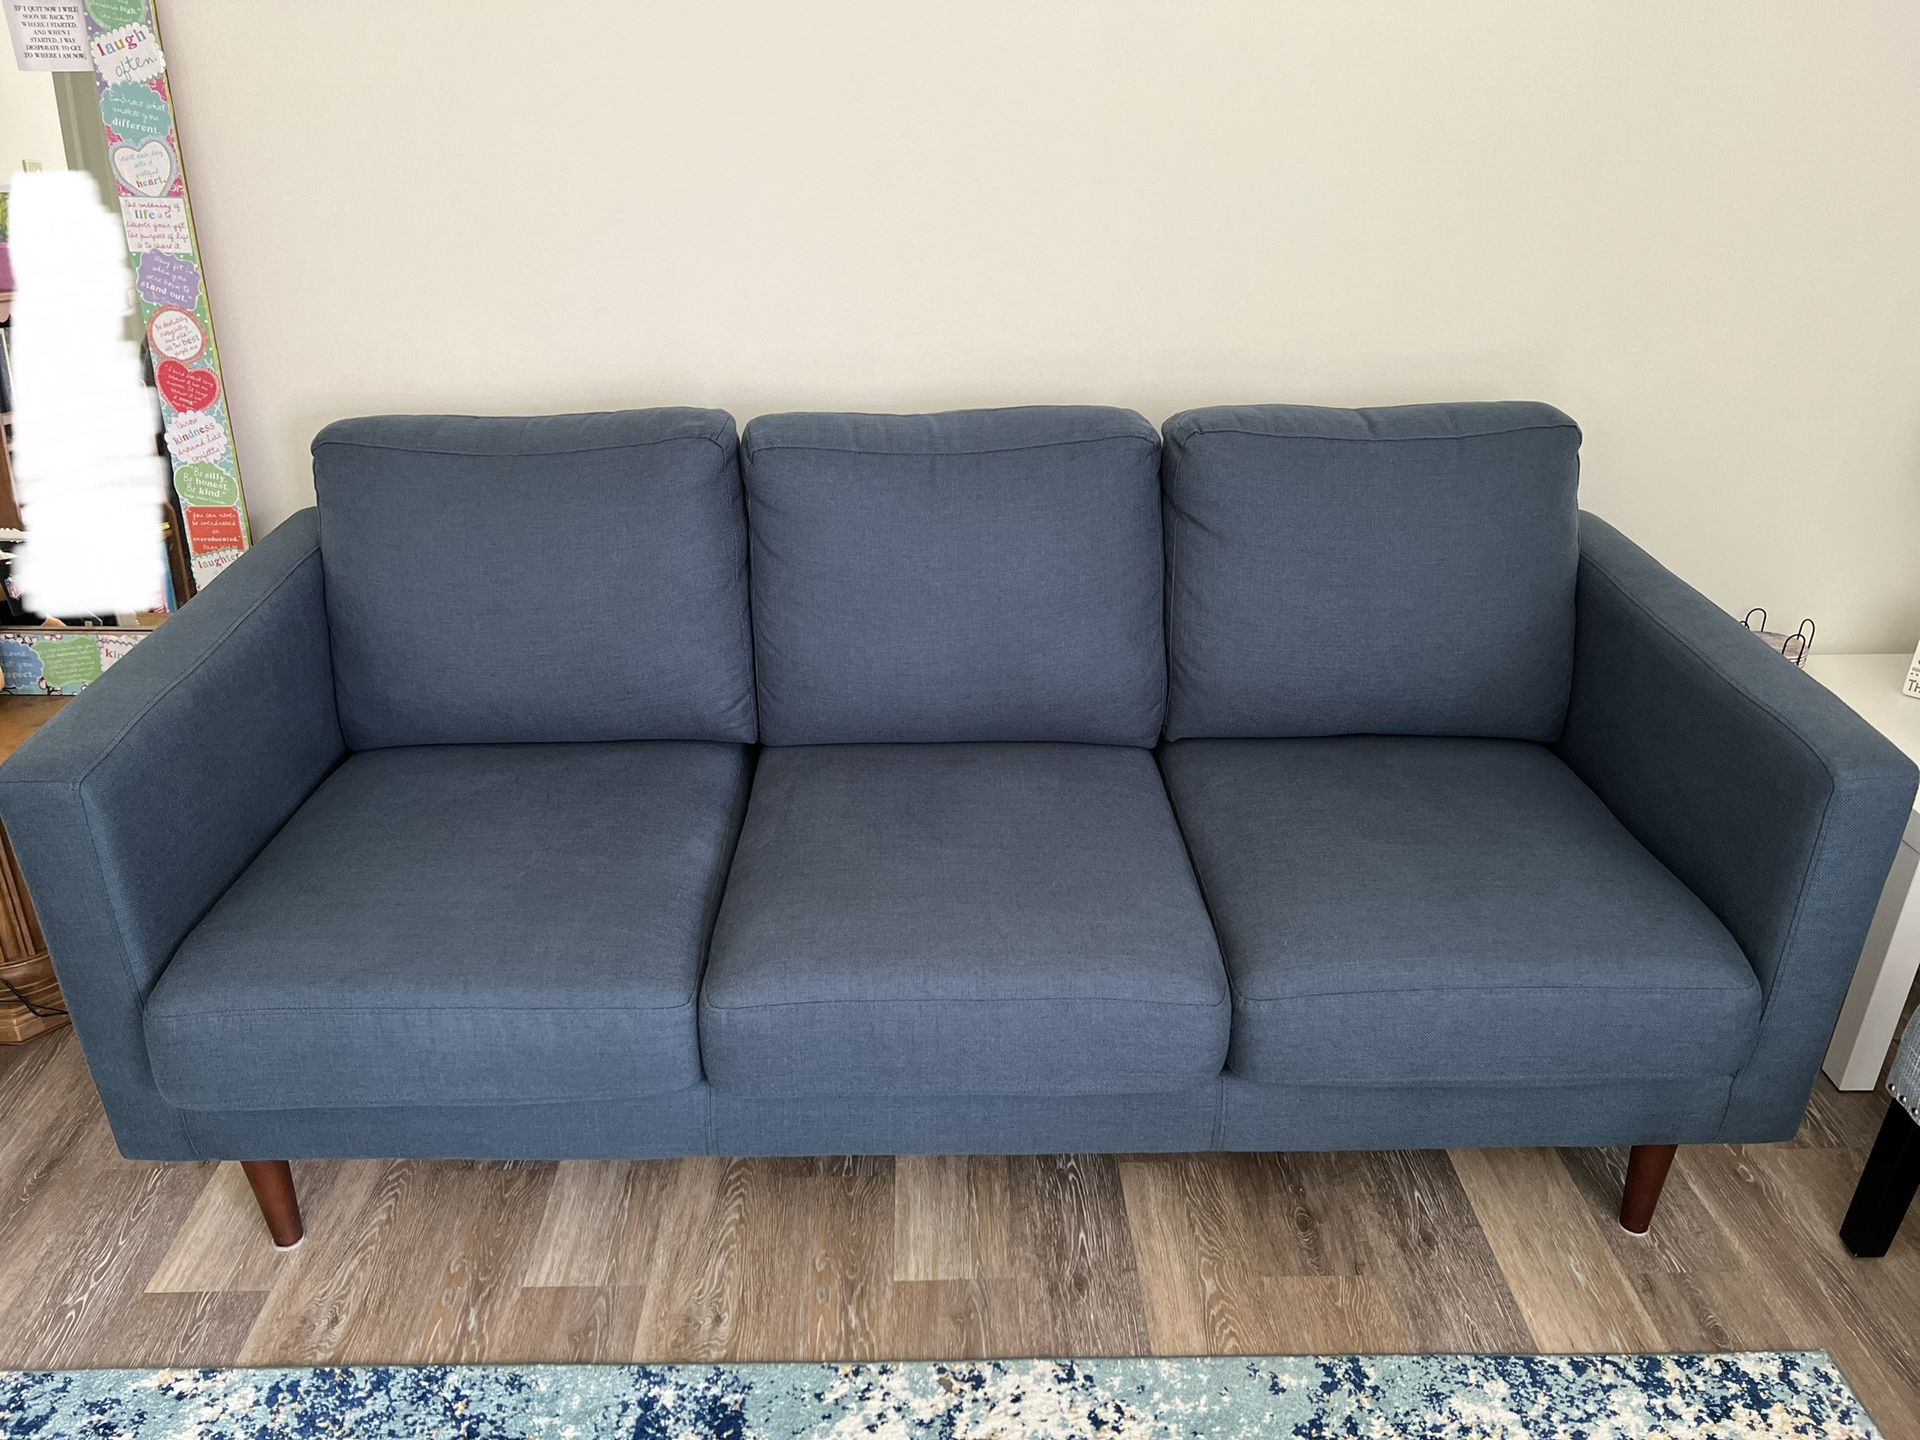 Very comfy and lightly used couch for sale